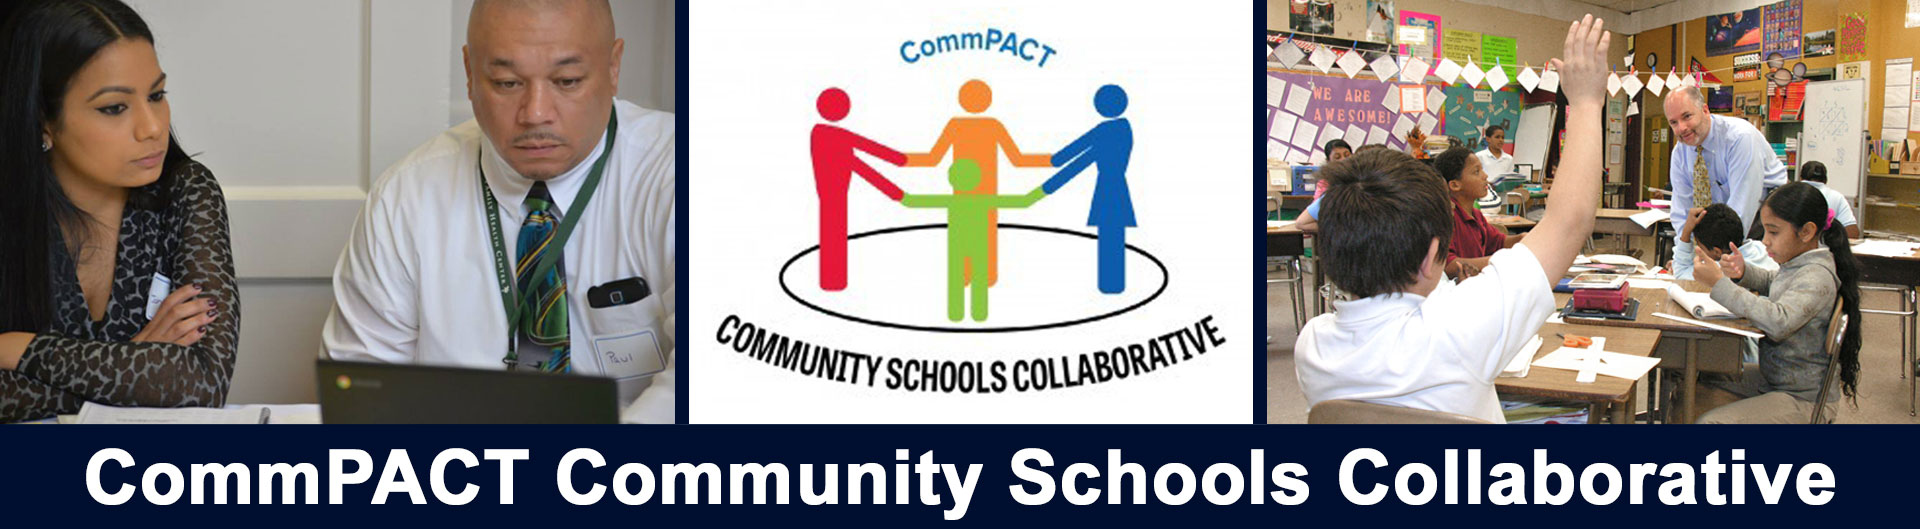 Homepage banner displaying CommPACT community members in action + CommPACT logo